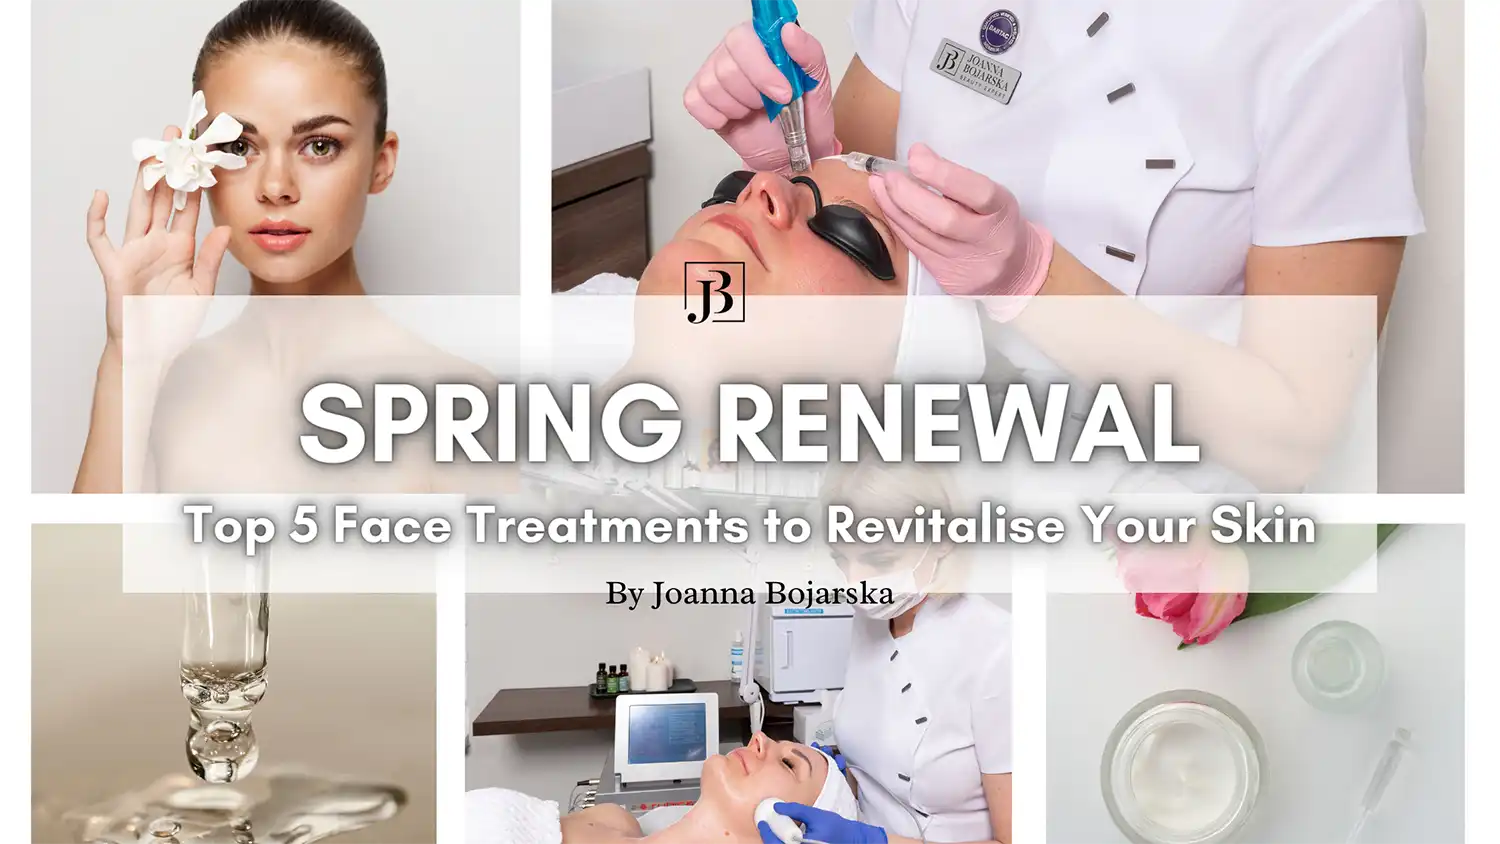 Spring Renewal - Top 5 Face Treatments to revitalise your skin - Post cover